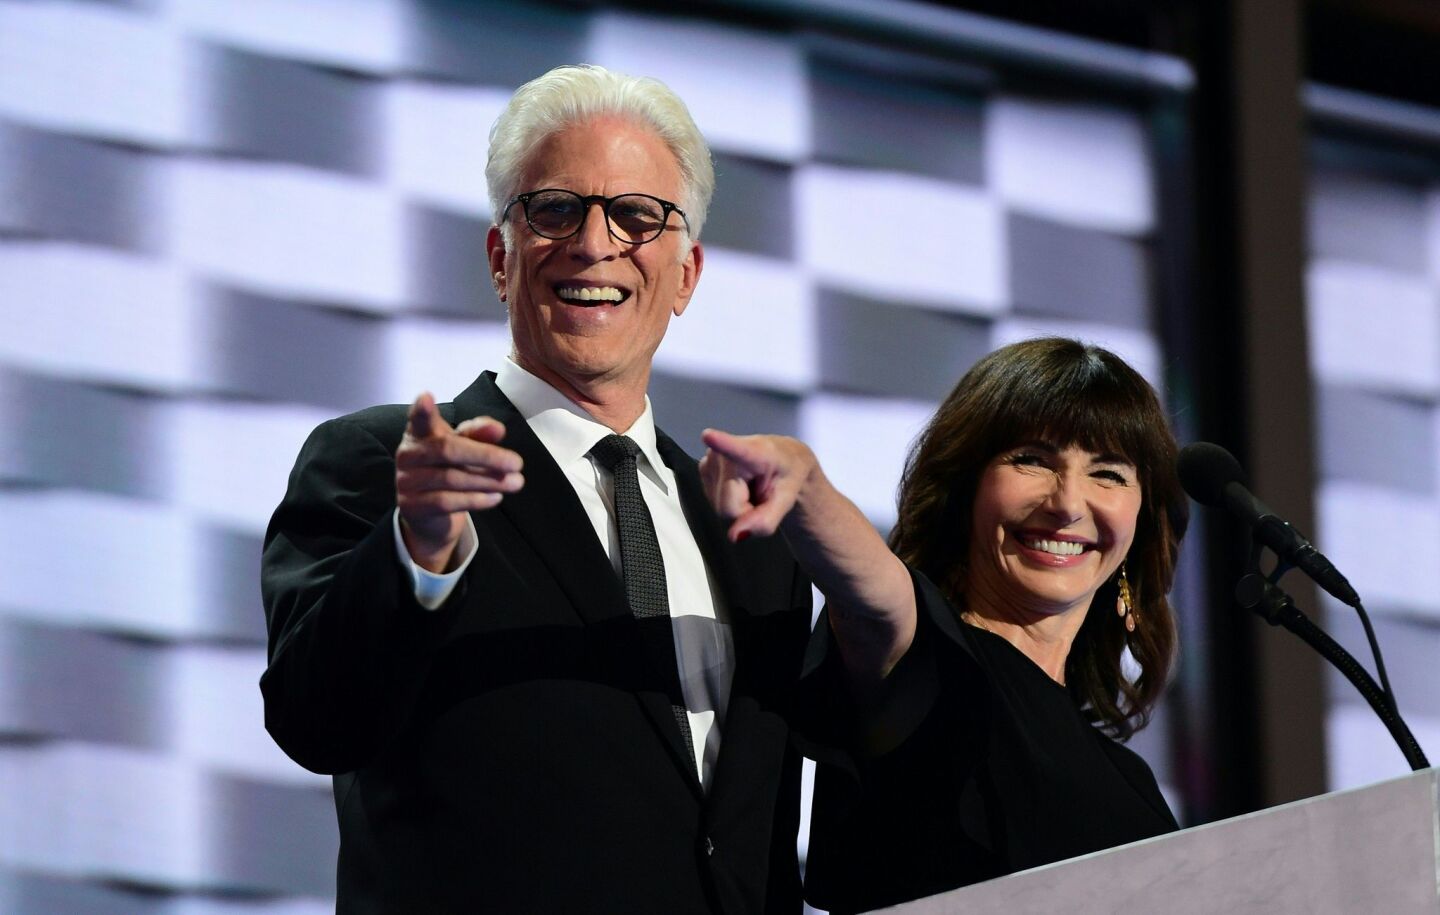 Actors Ted Danson and Mary Steenburgen speak during the final day of the 2016 Democratic National Convention